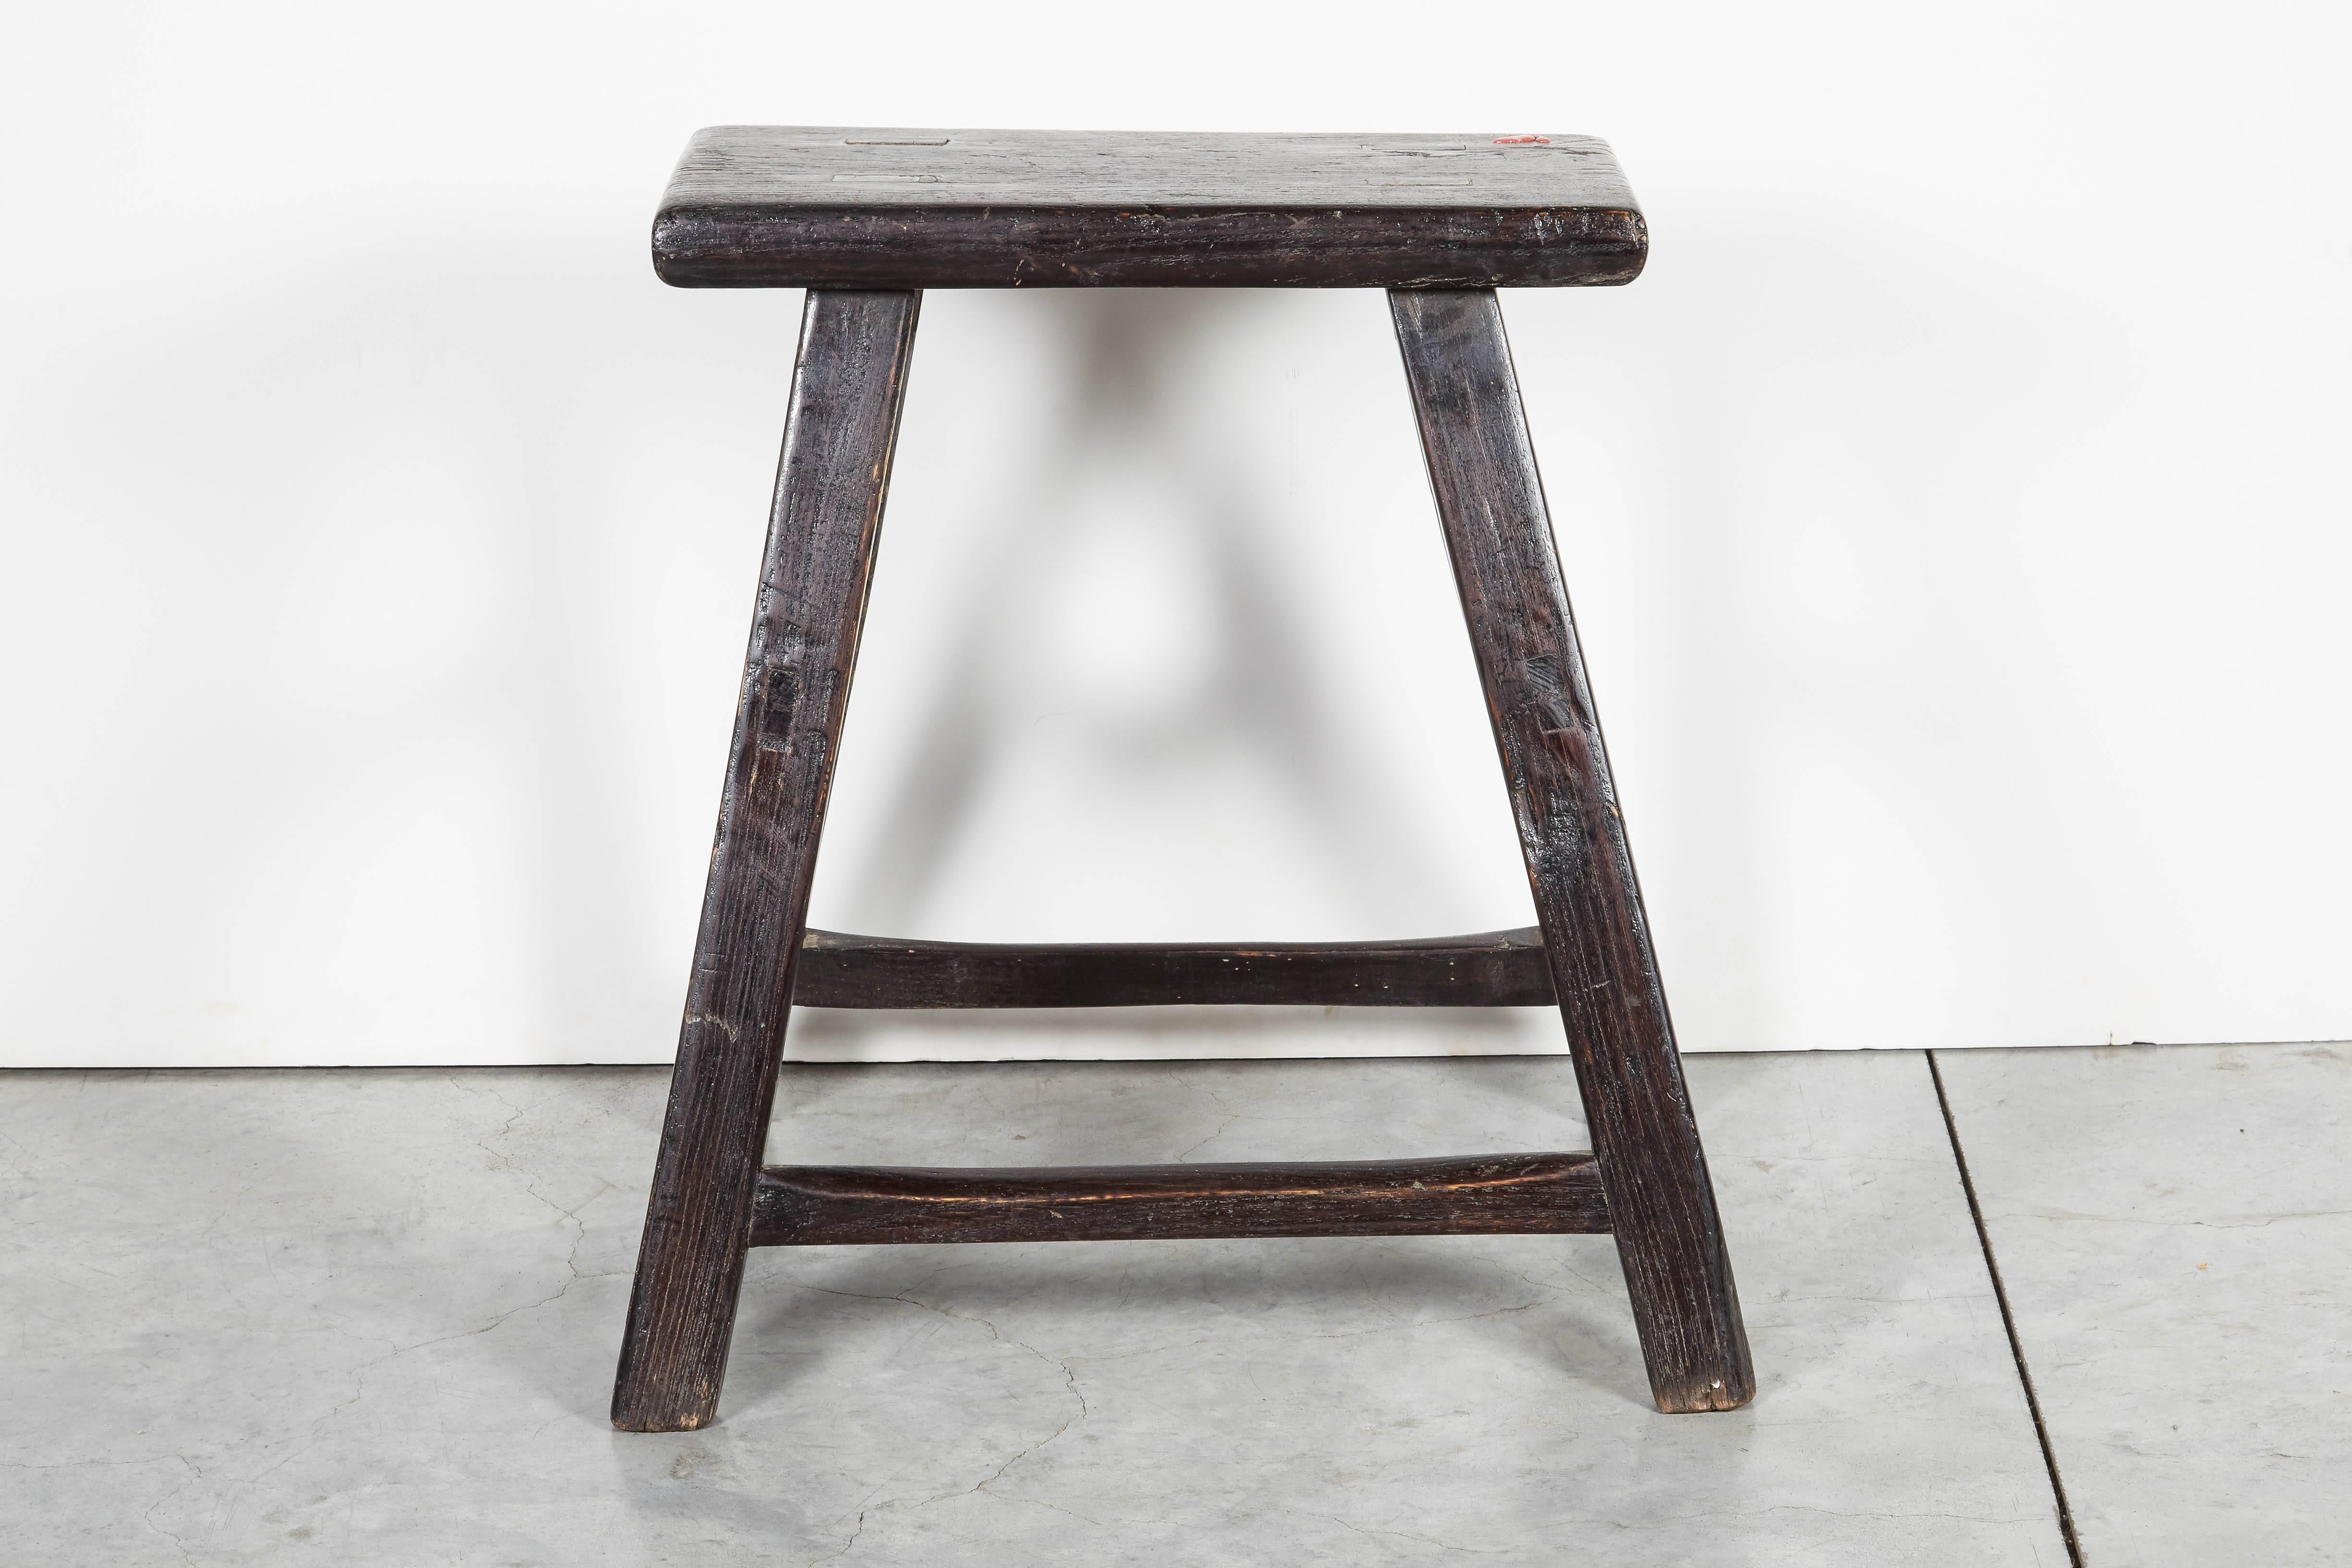 A Classic, simply designed antique Chinese stool with old paint and mortised joints. Perfect entryway piece, useful for extra seating or as a handsome side table.
From Shanxi Province, circa 1920.
S517.